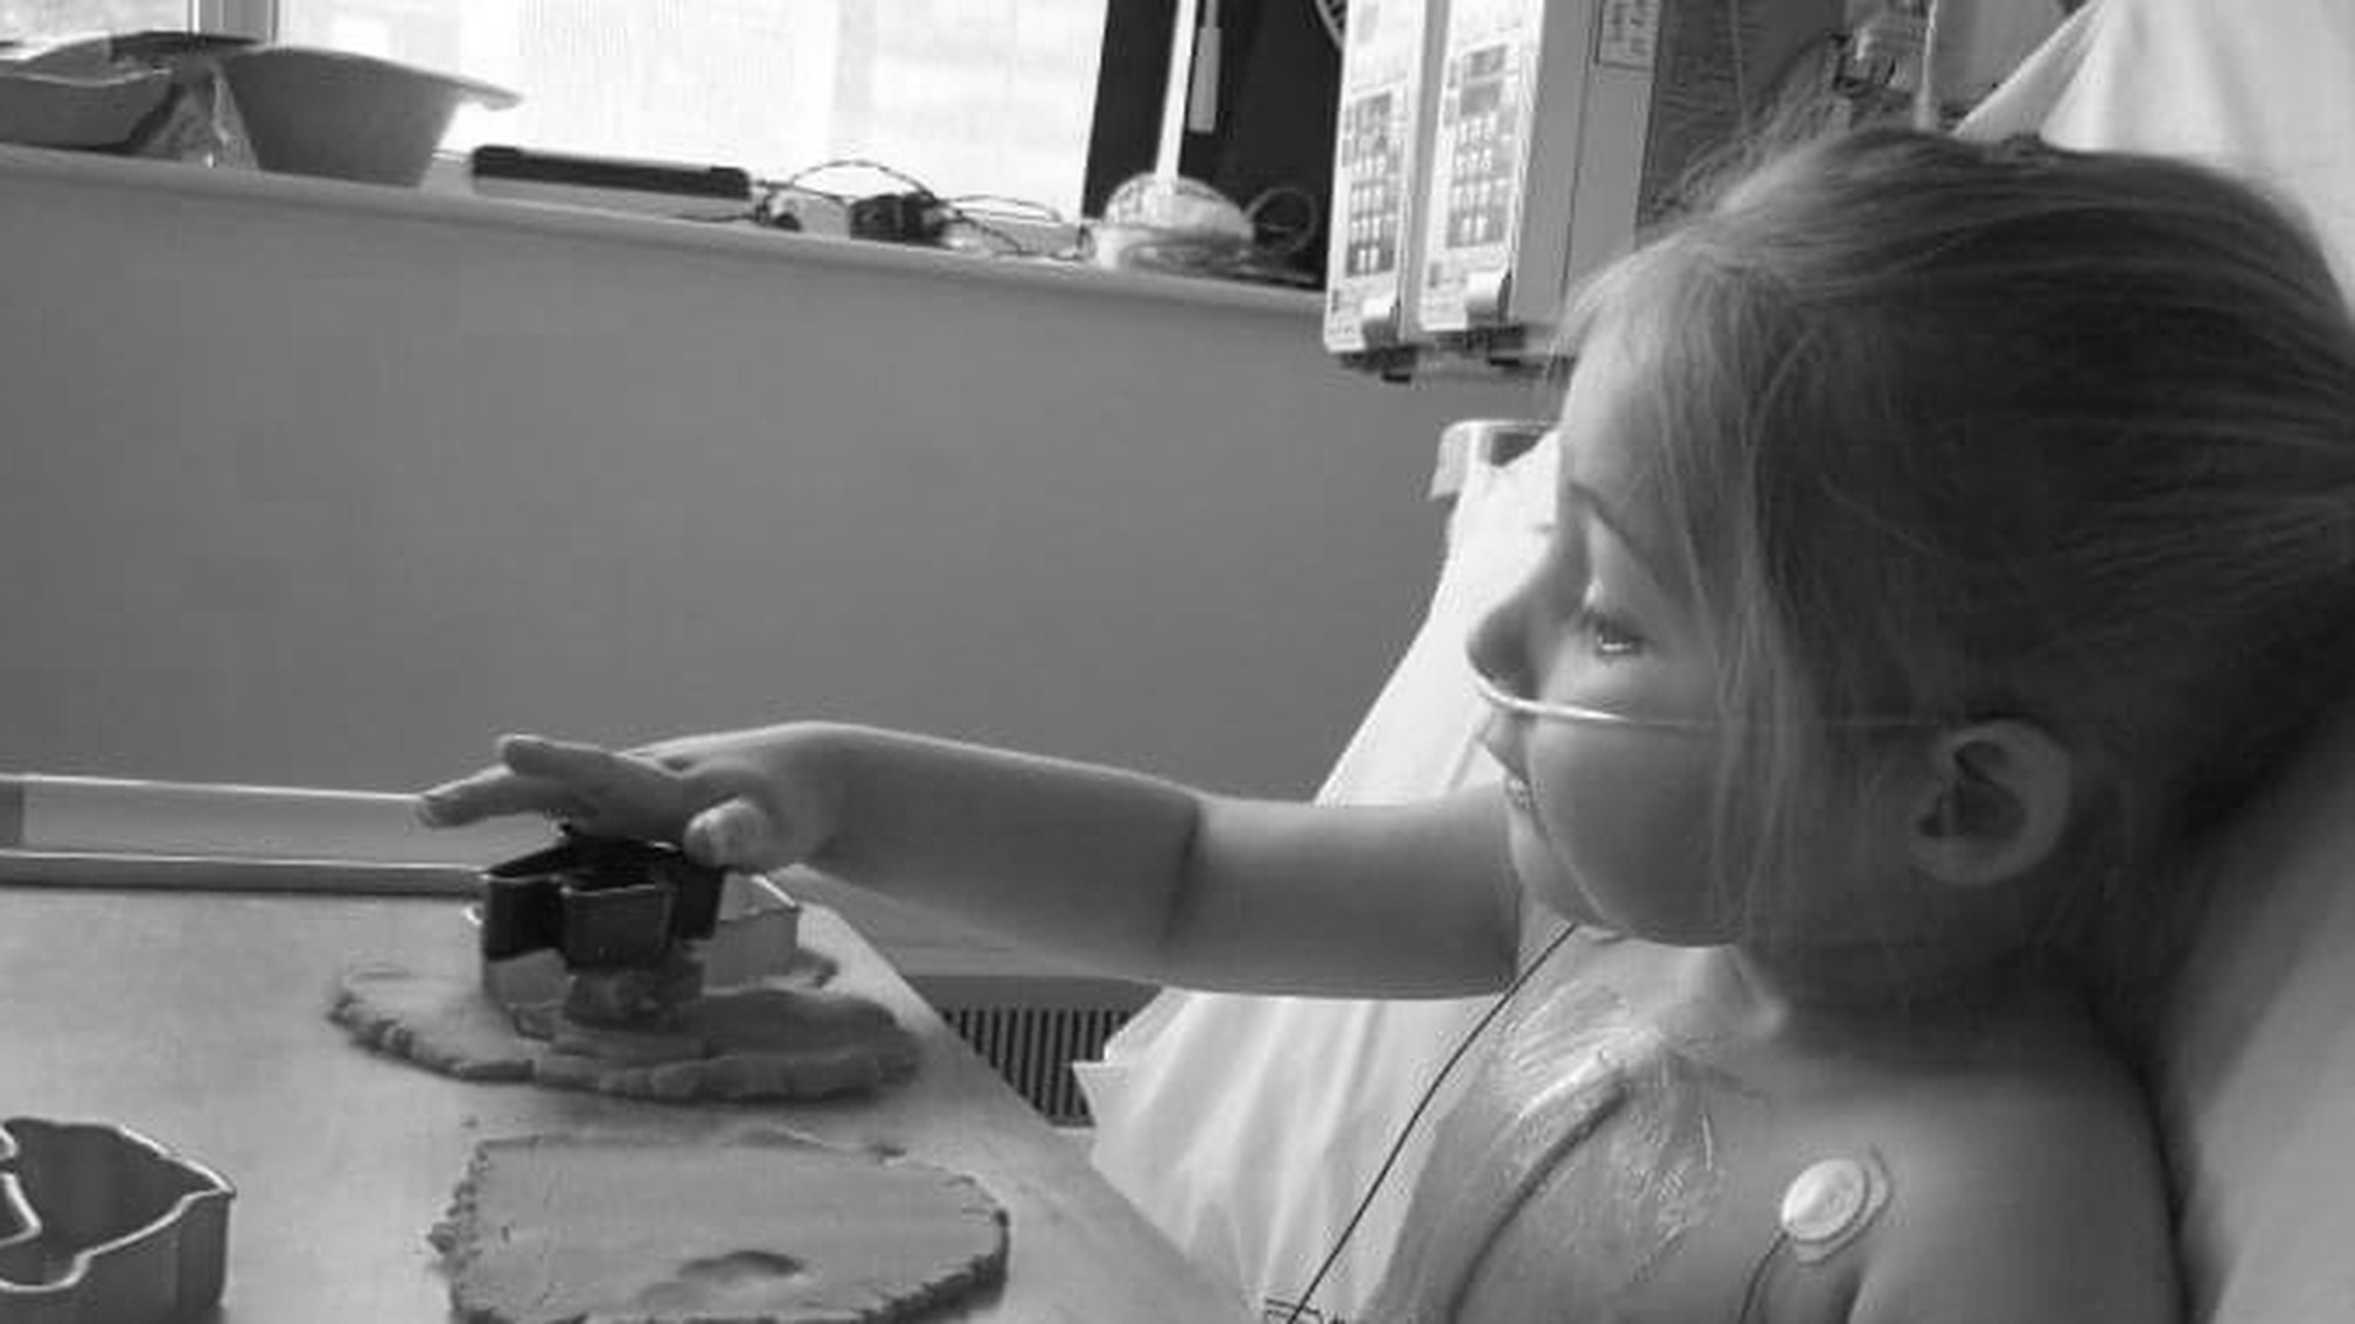 Eloise cutting out shapes with a cookie cutter while in her hospital bed.